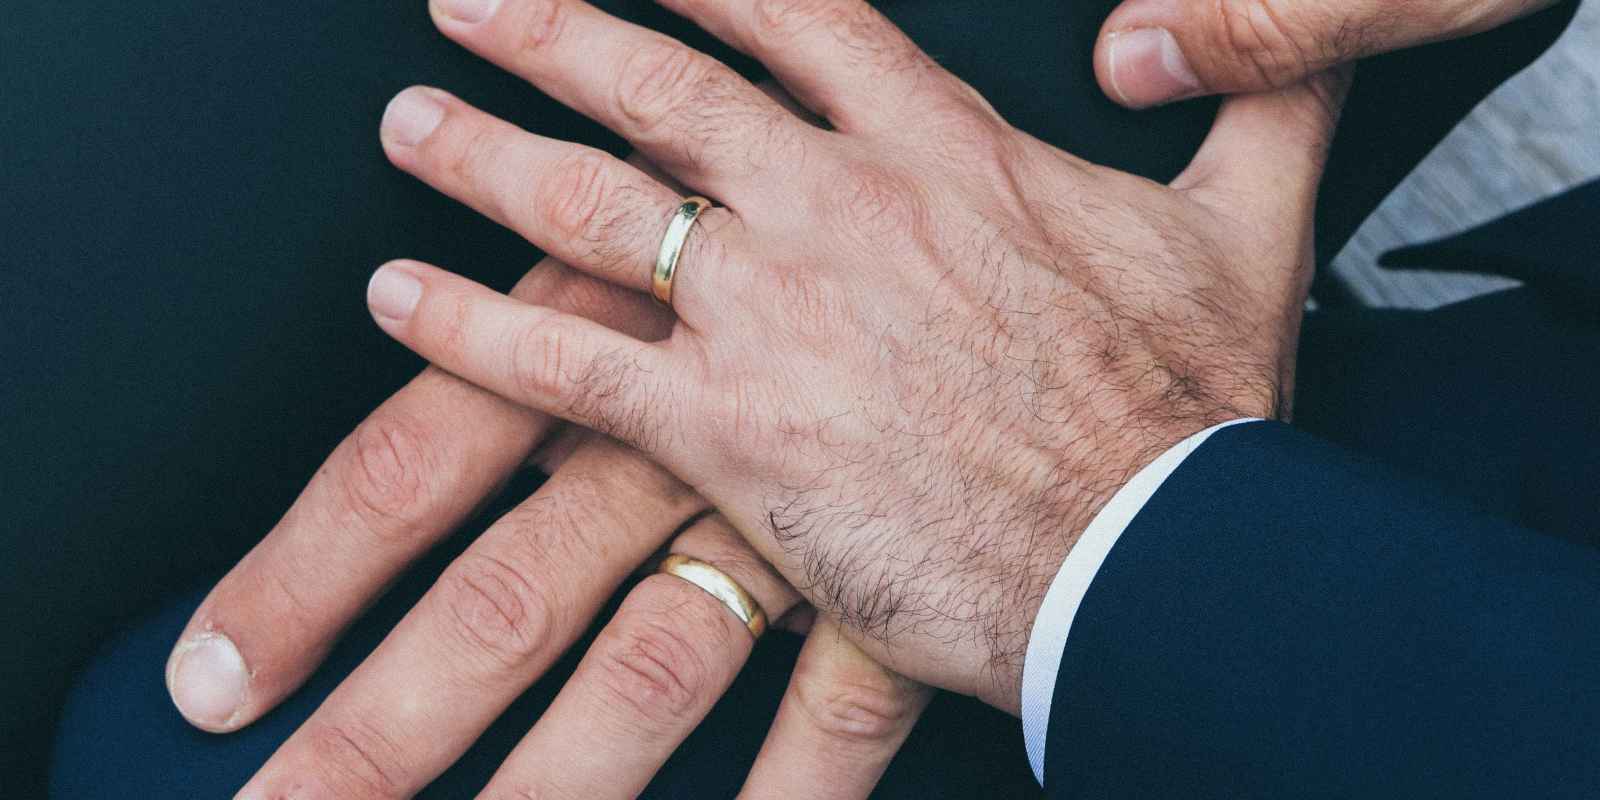 Photo of one hand on top of another, both wearing wedding rings